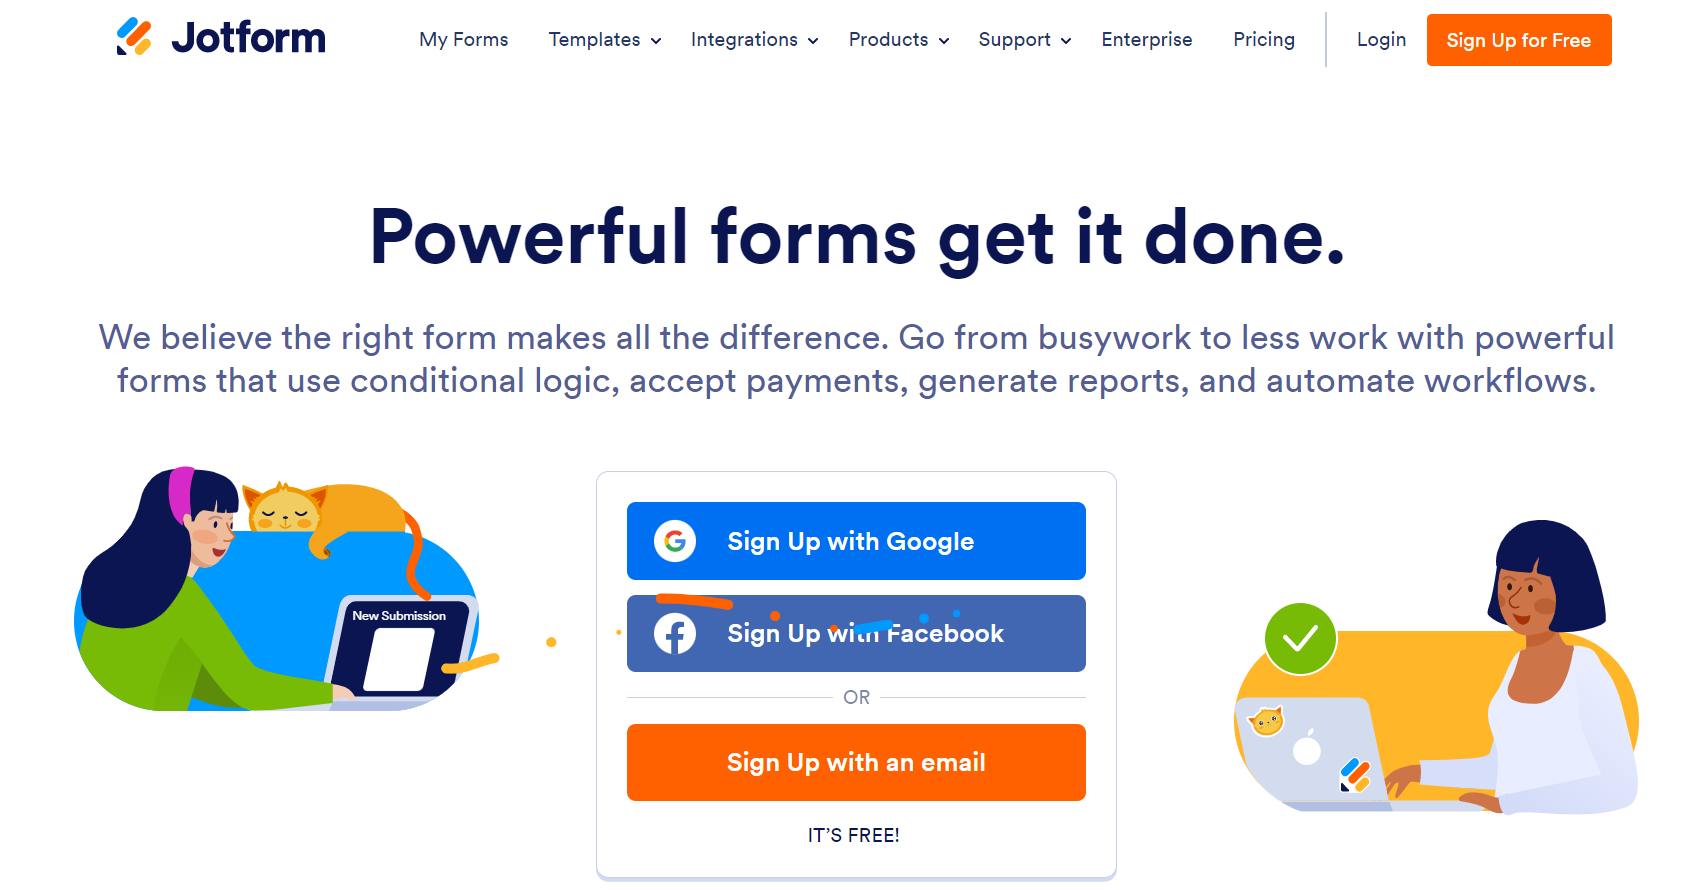 The image is of the Jotform homepage, a CSAT tool for measuring customer satisfaction. 